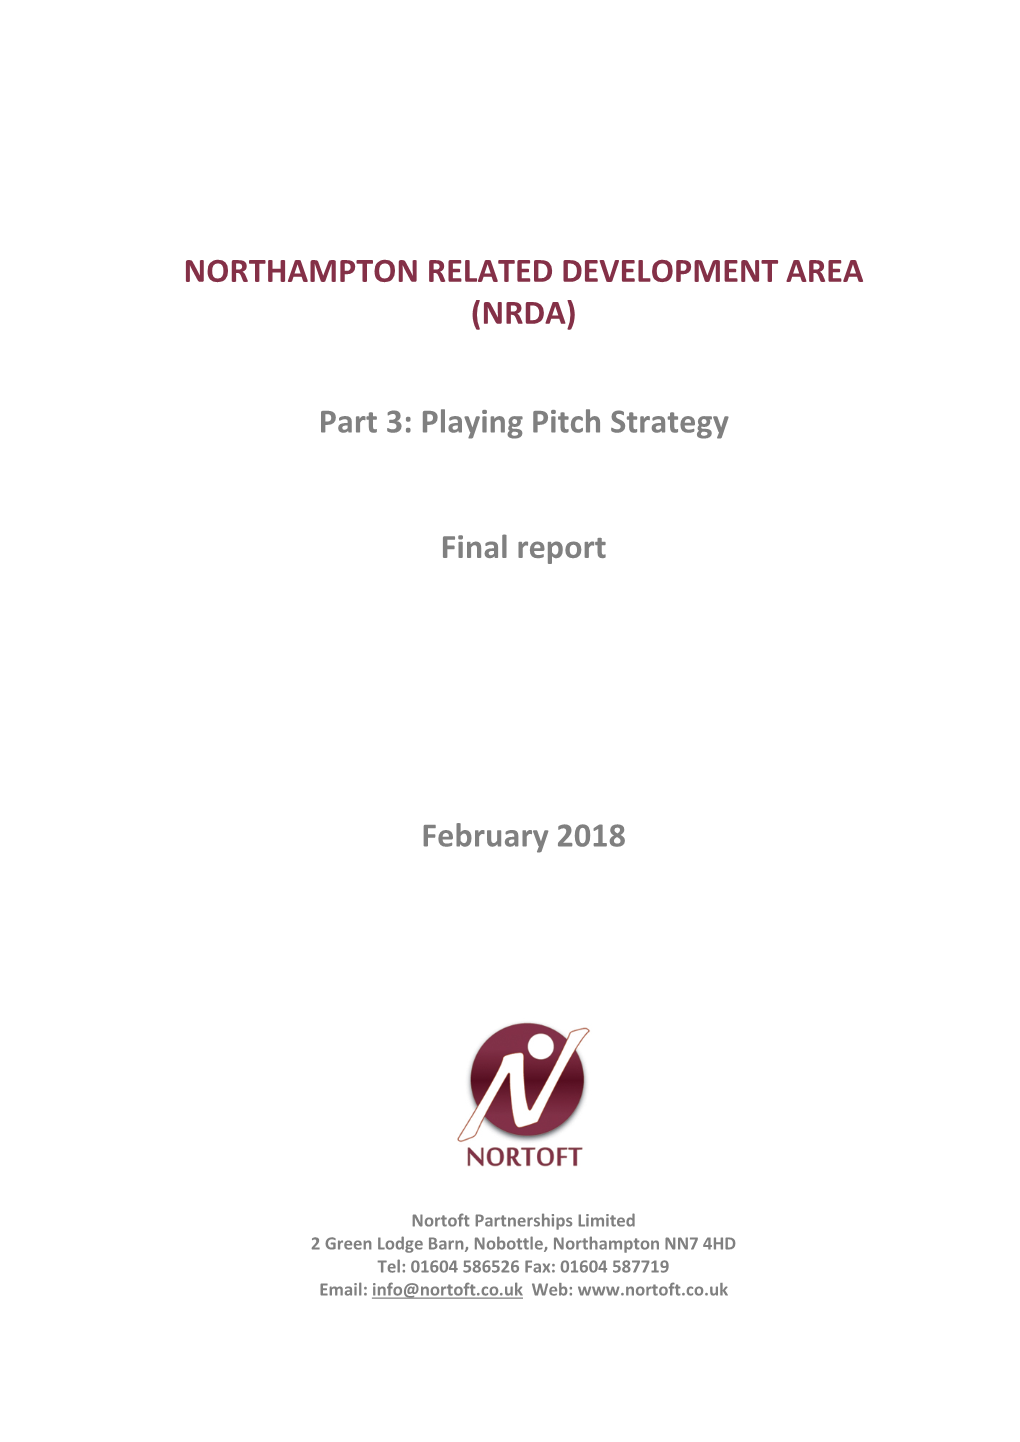 (NRDA) Part 3: Playing Pitch Strategy Final Report February 2018